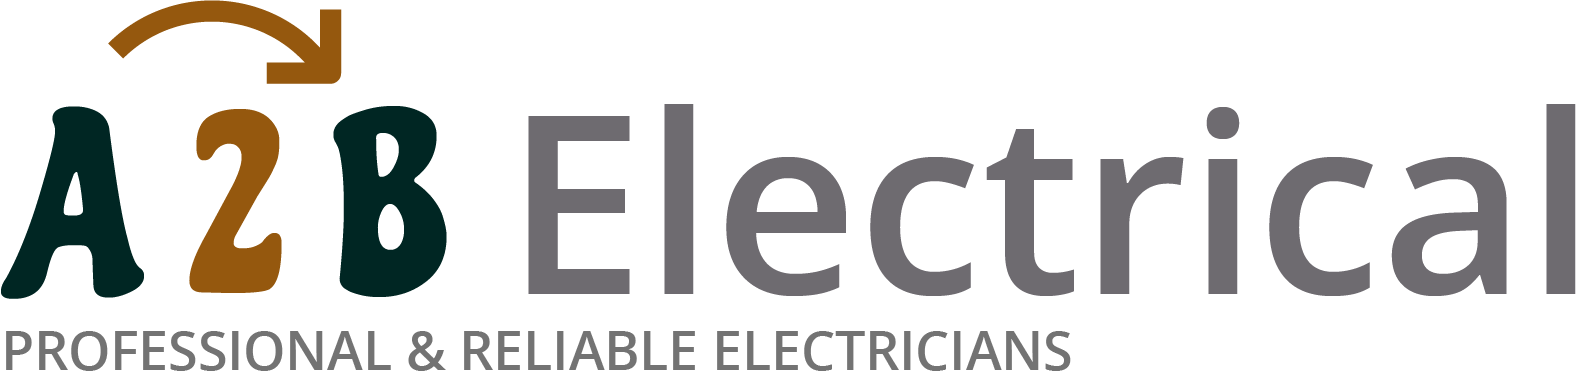 If you have electrical wiring problems in Banbury, we can provide an electrician to have a look for you. 